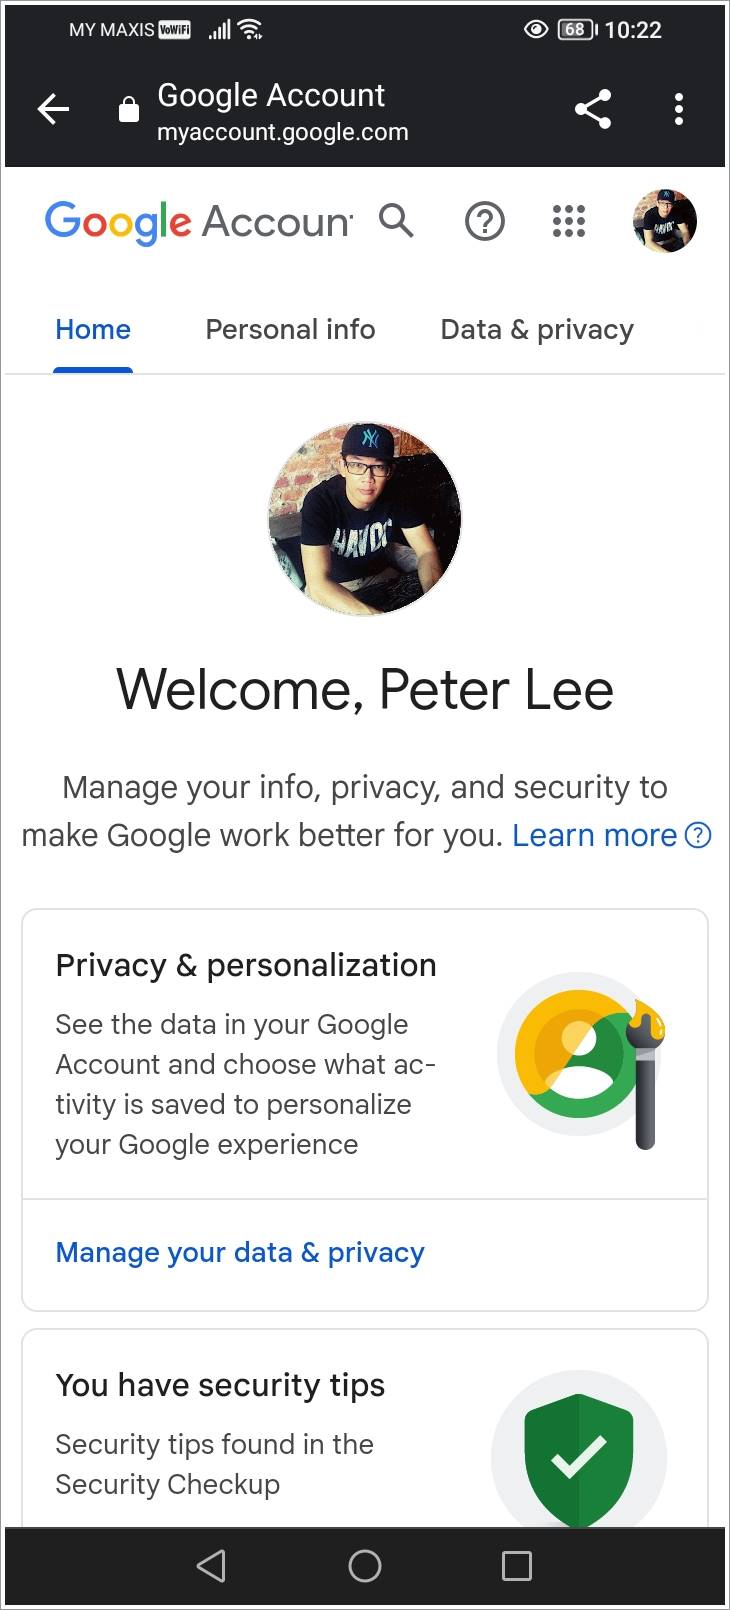 This is a screenshot of the Google Account homepage on a mobile device.